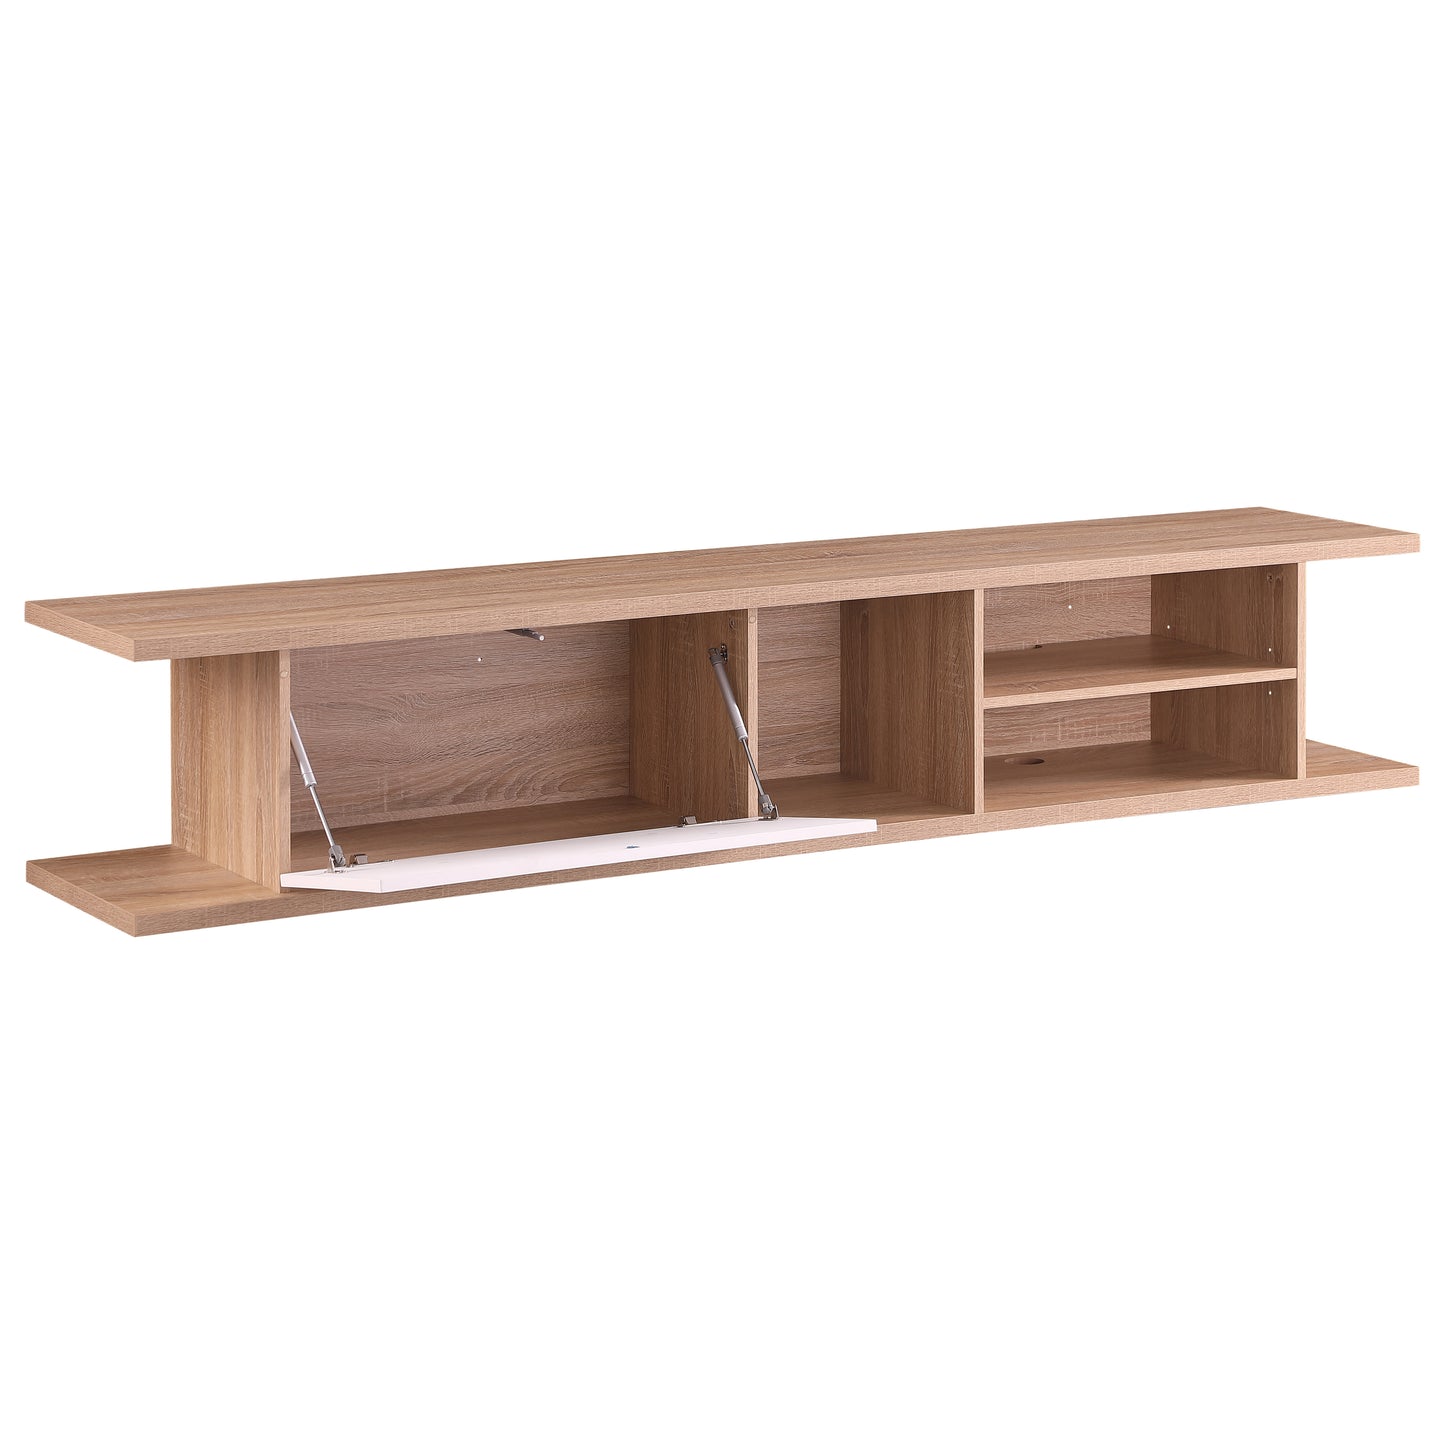 Tauris Auldrin 2000 Floating Entertainment Unit, Hovering Wall Mount Cabinet Oak